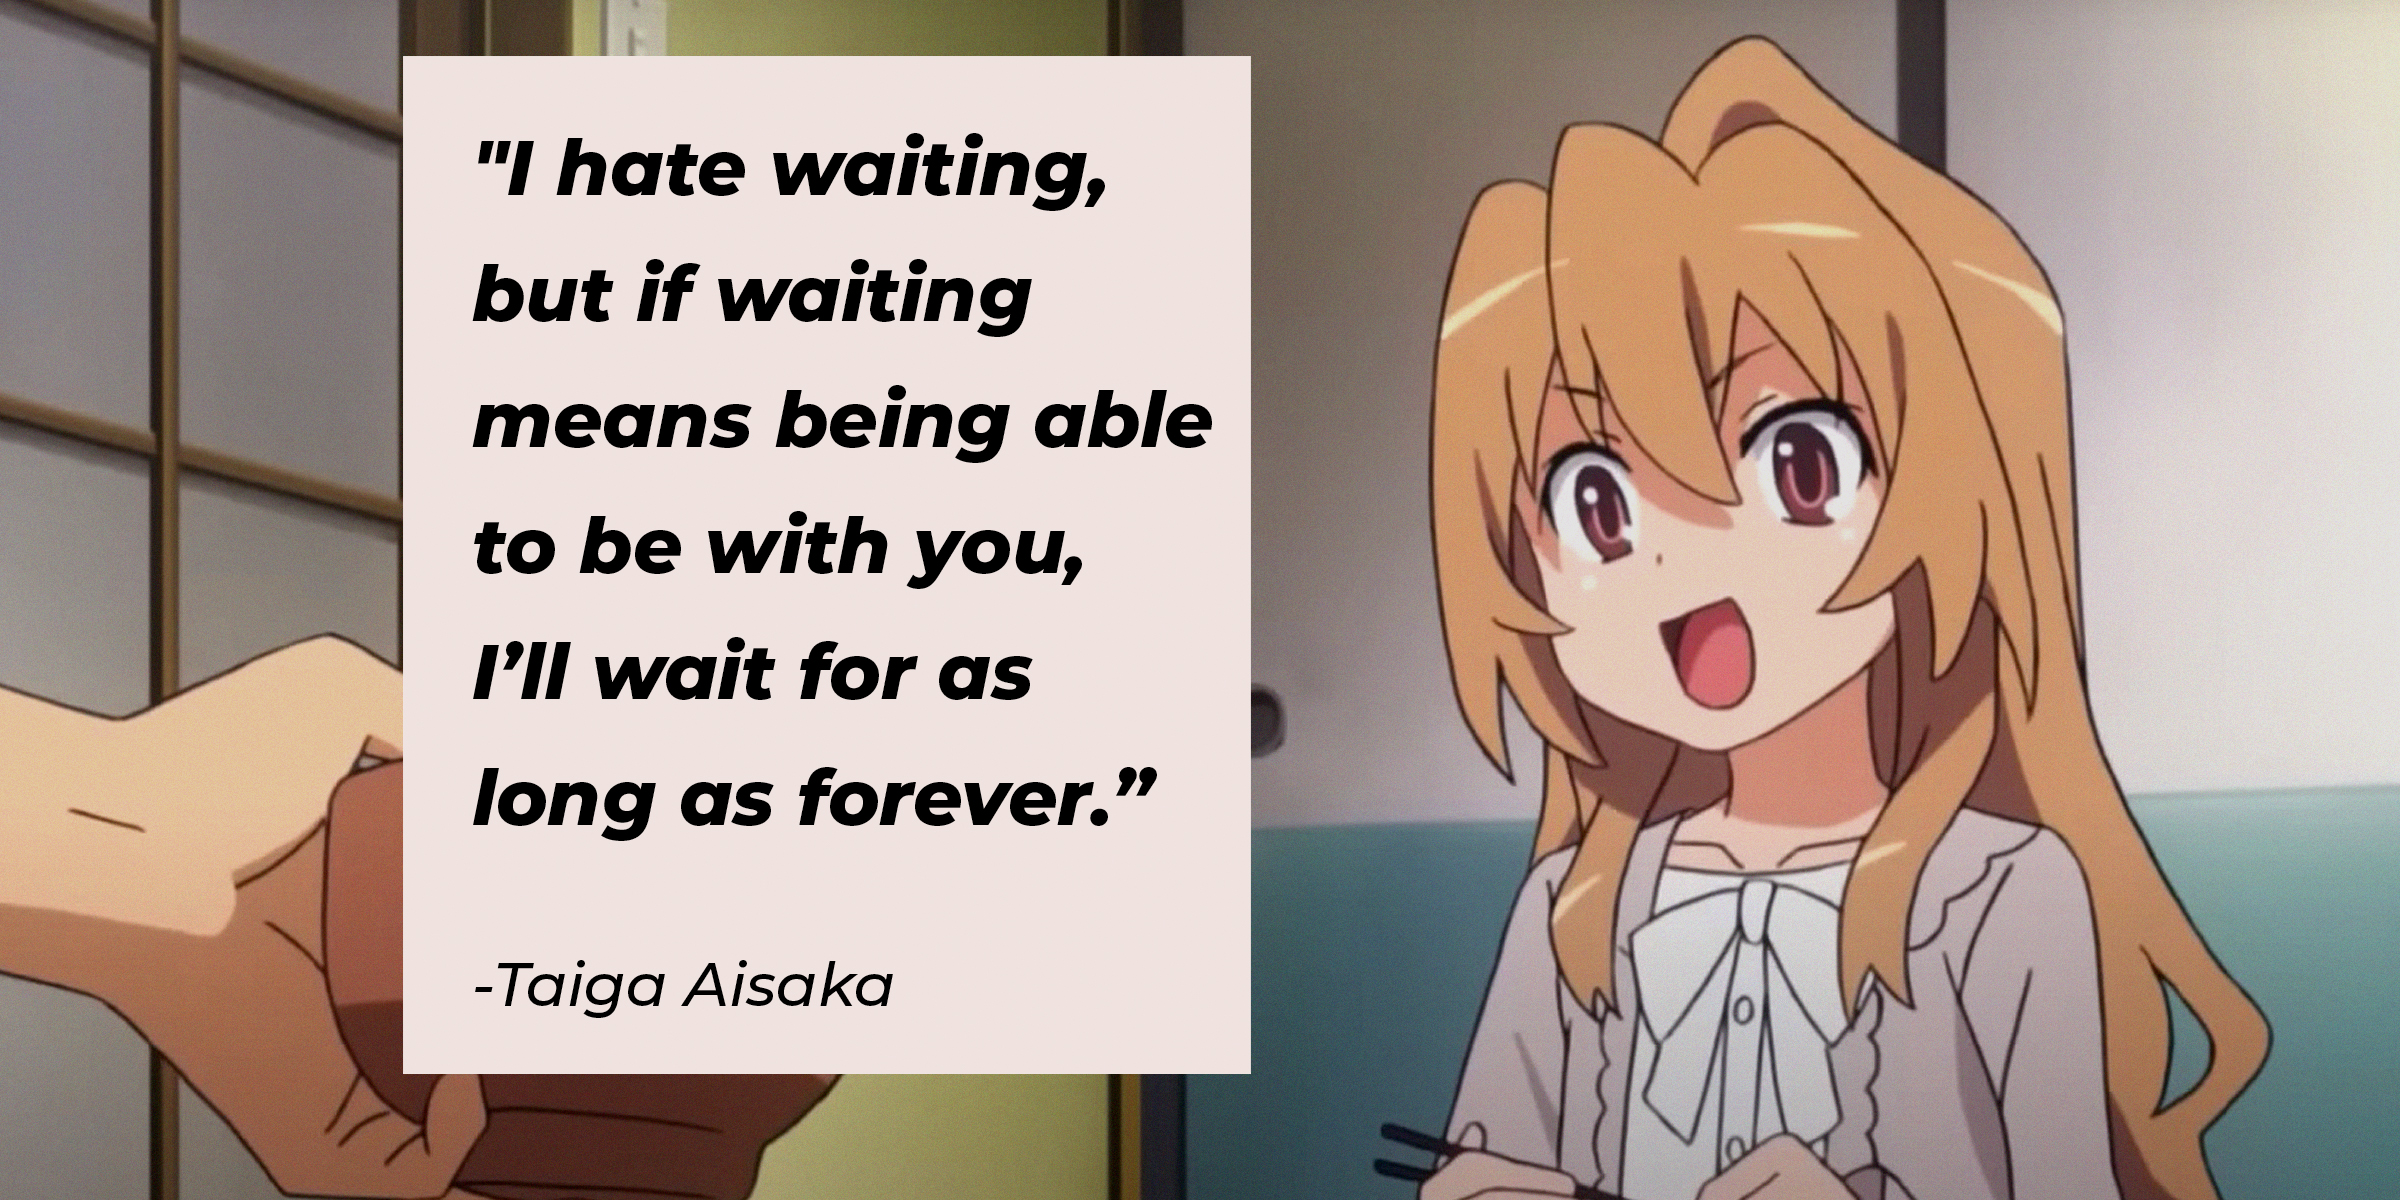 A picture of the animated character Taiga Aisaka with a quote by her: “I hate waiting but if waiting means being able to be with you, I’ll wait for as long as forever.” | Source: facebook.com/toradoraoff